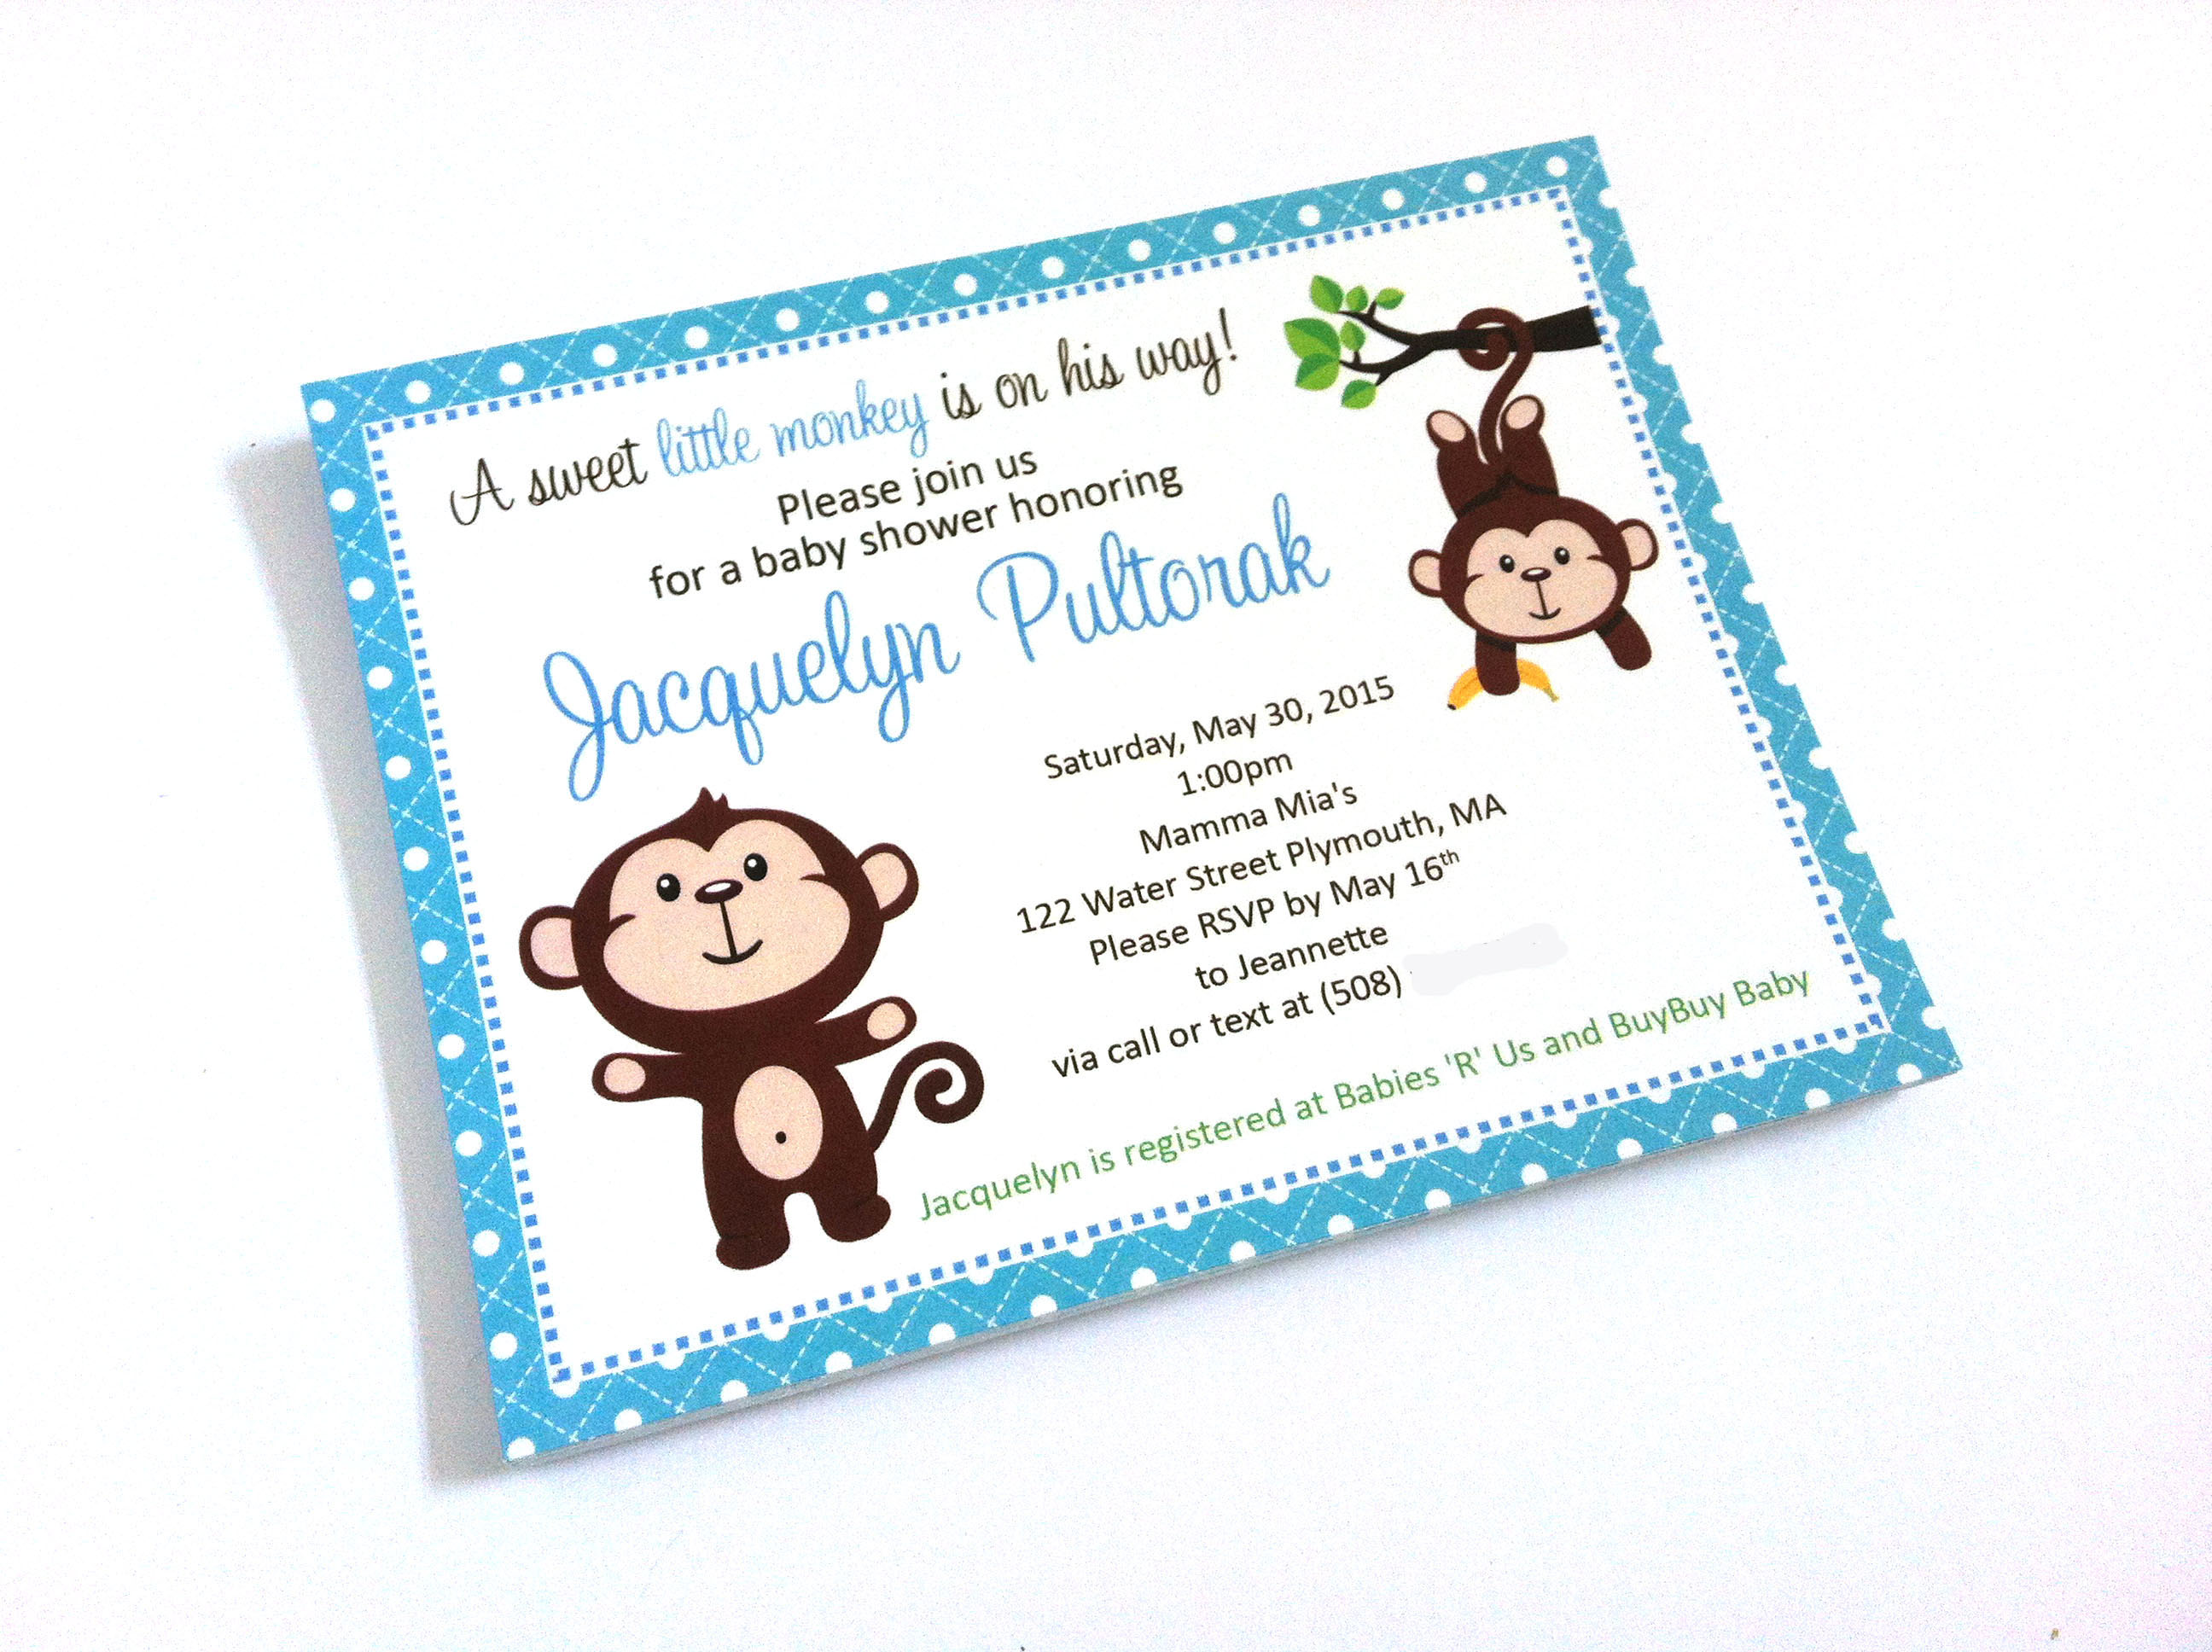 Optional Decorations Cake Topper Favor Tags or Stickers Centerpiece Handmade in USA BCPCustom Thank You Cards Personalized Monkey Baby Shower or Birthday Party Banner for Boy Sign 